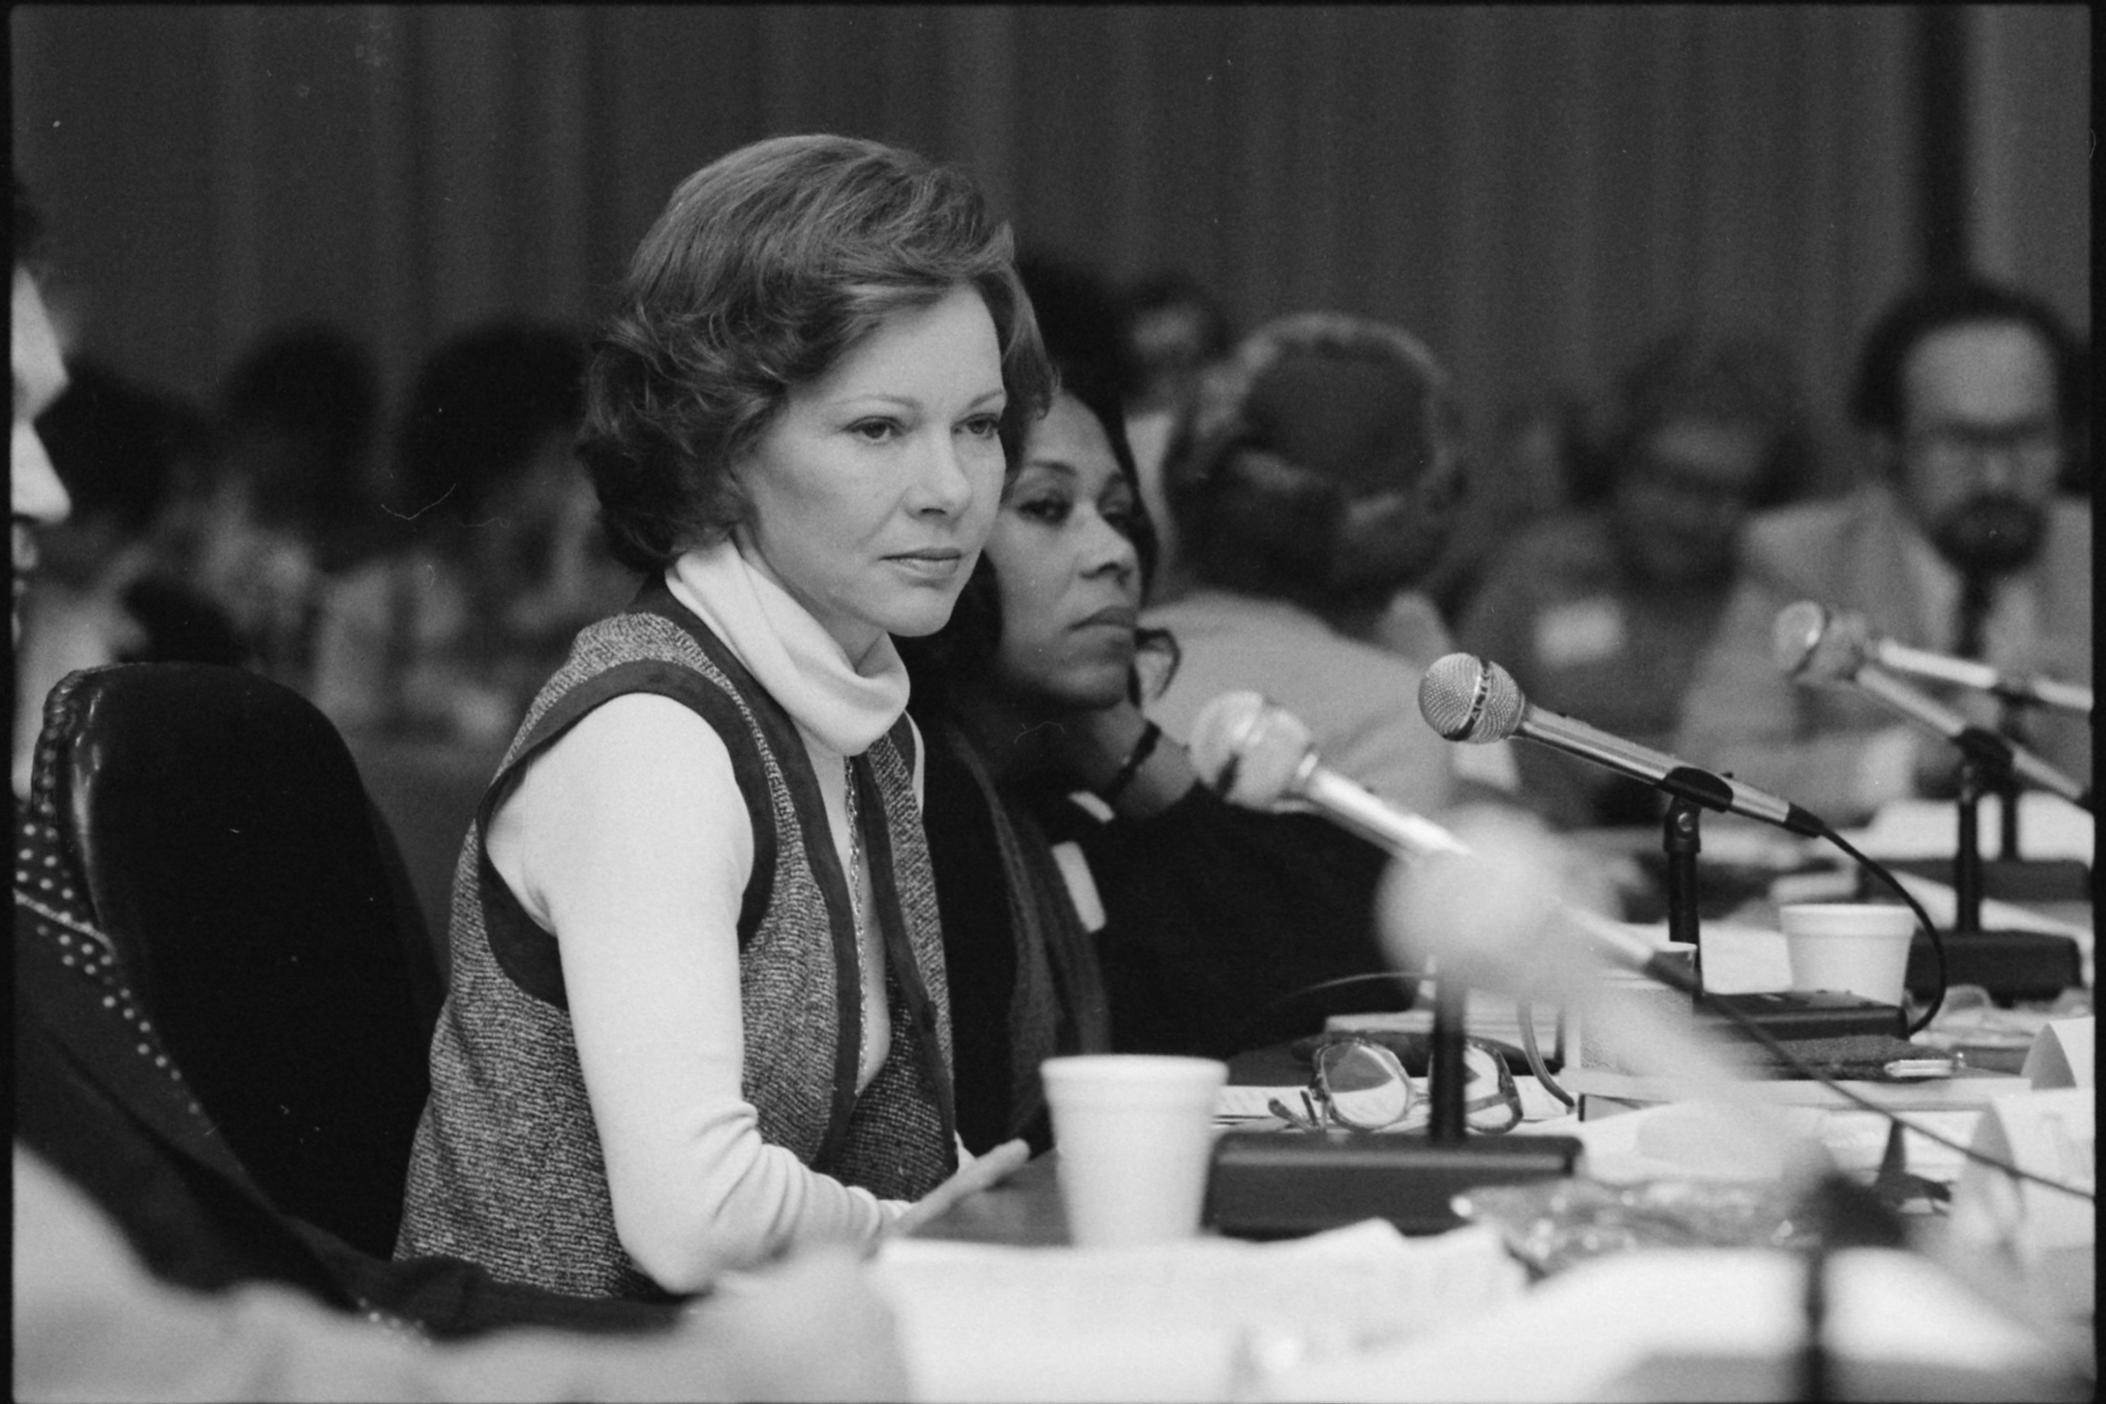 Rosalynn Carter chairs a meeting in Chicago, IL. for the President's Commission on Mental Health.